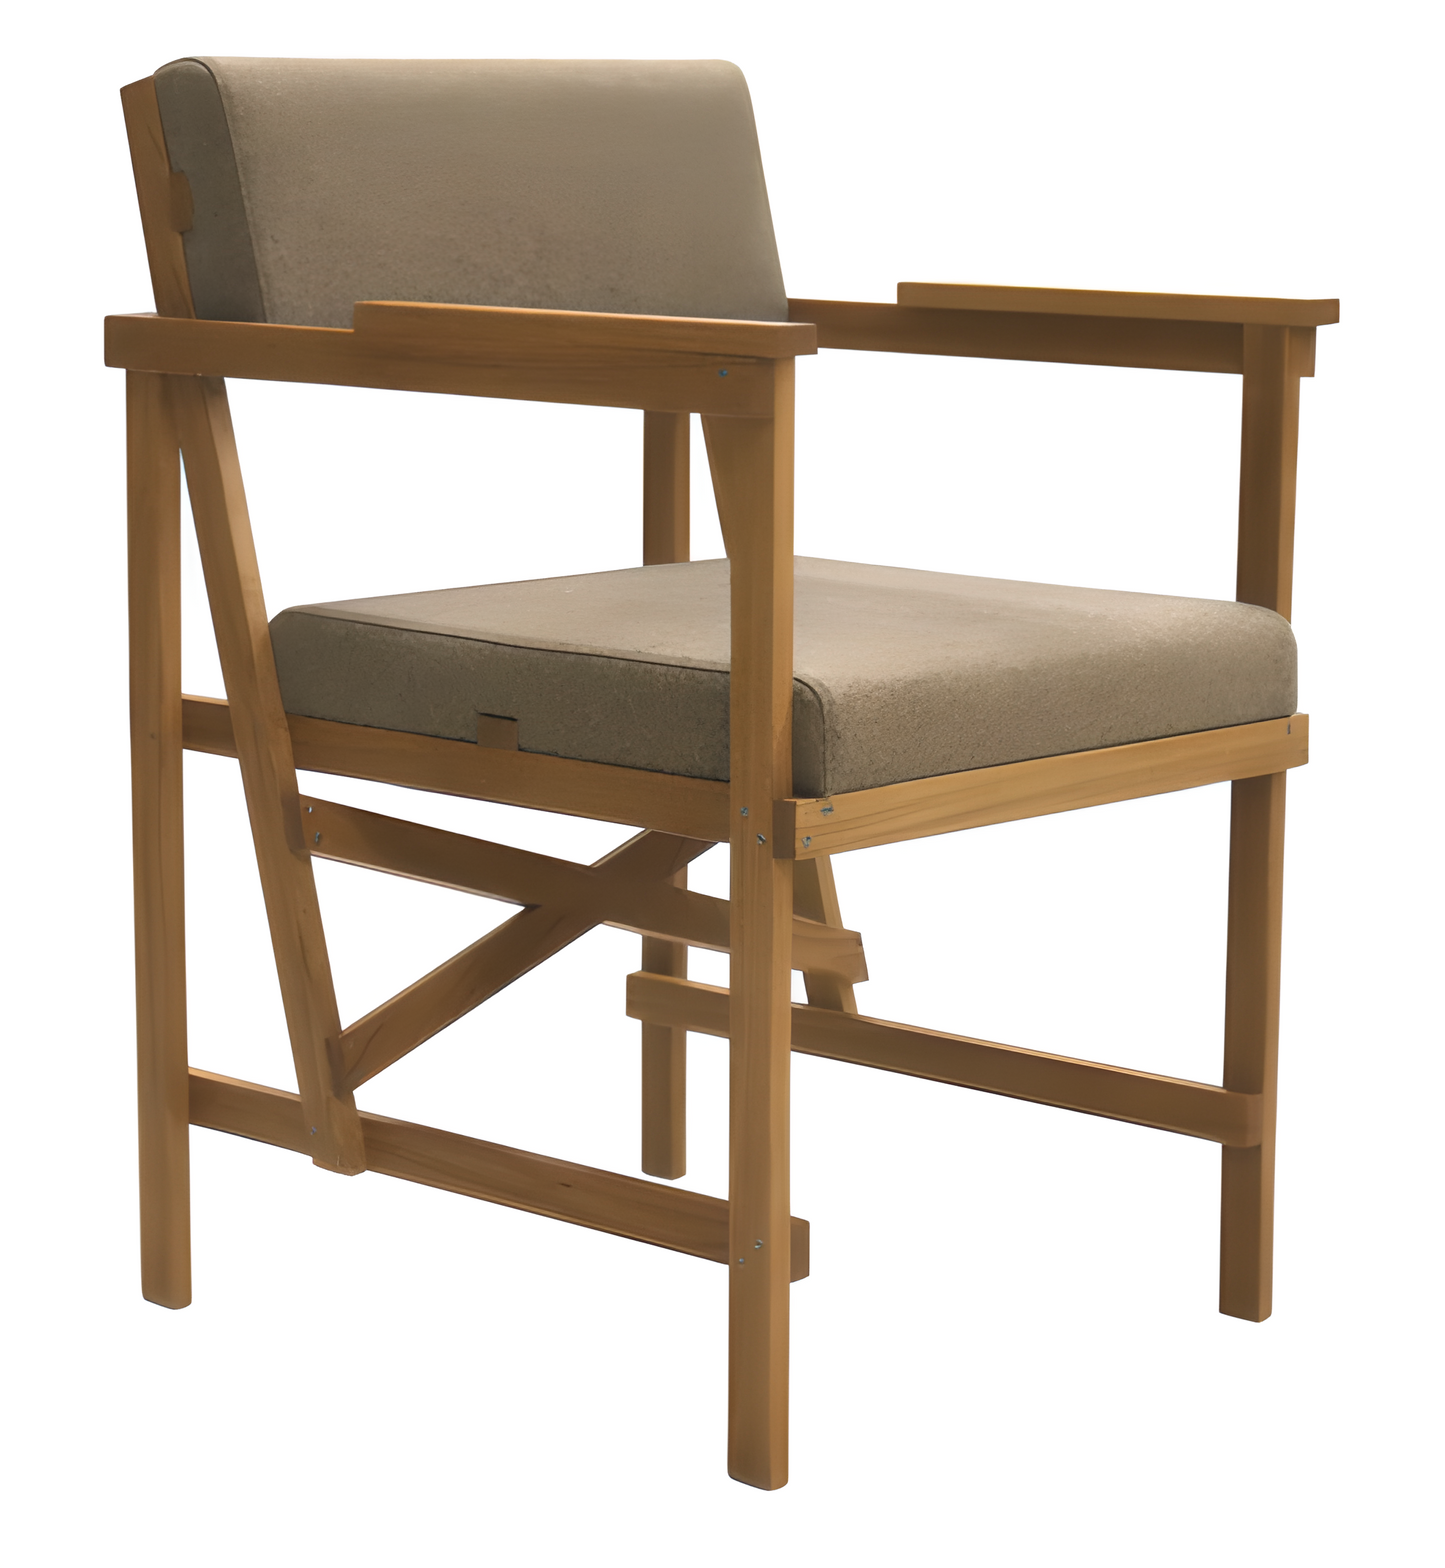 As-Thick-as-Wide-Chair